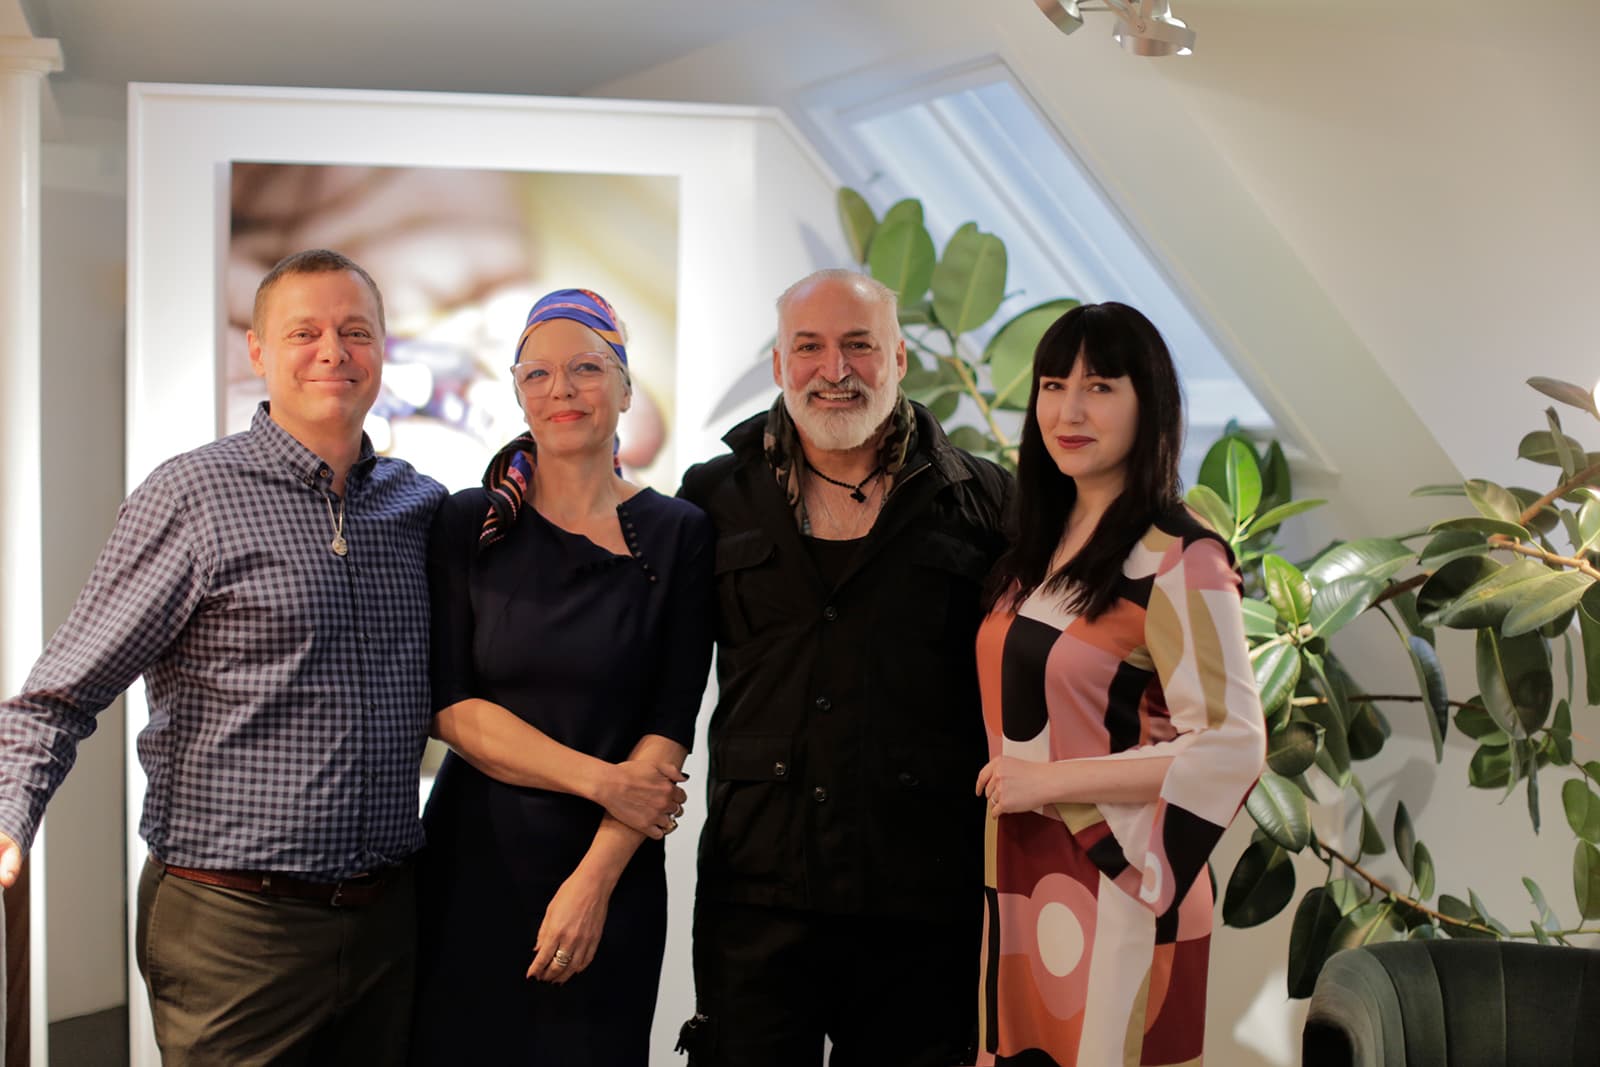 From left to right: Svend Wennick, Camilla Frederiksen, Yianni Melas and Katerina Perez at the Copenhagen-based event organised by Wennick-Lefèvre and Marc’Harit 